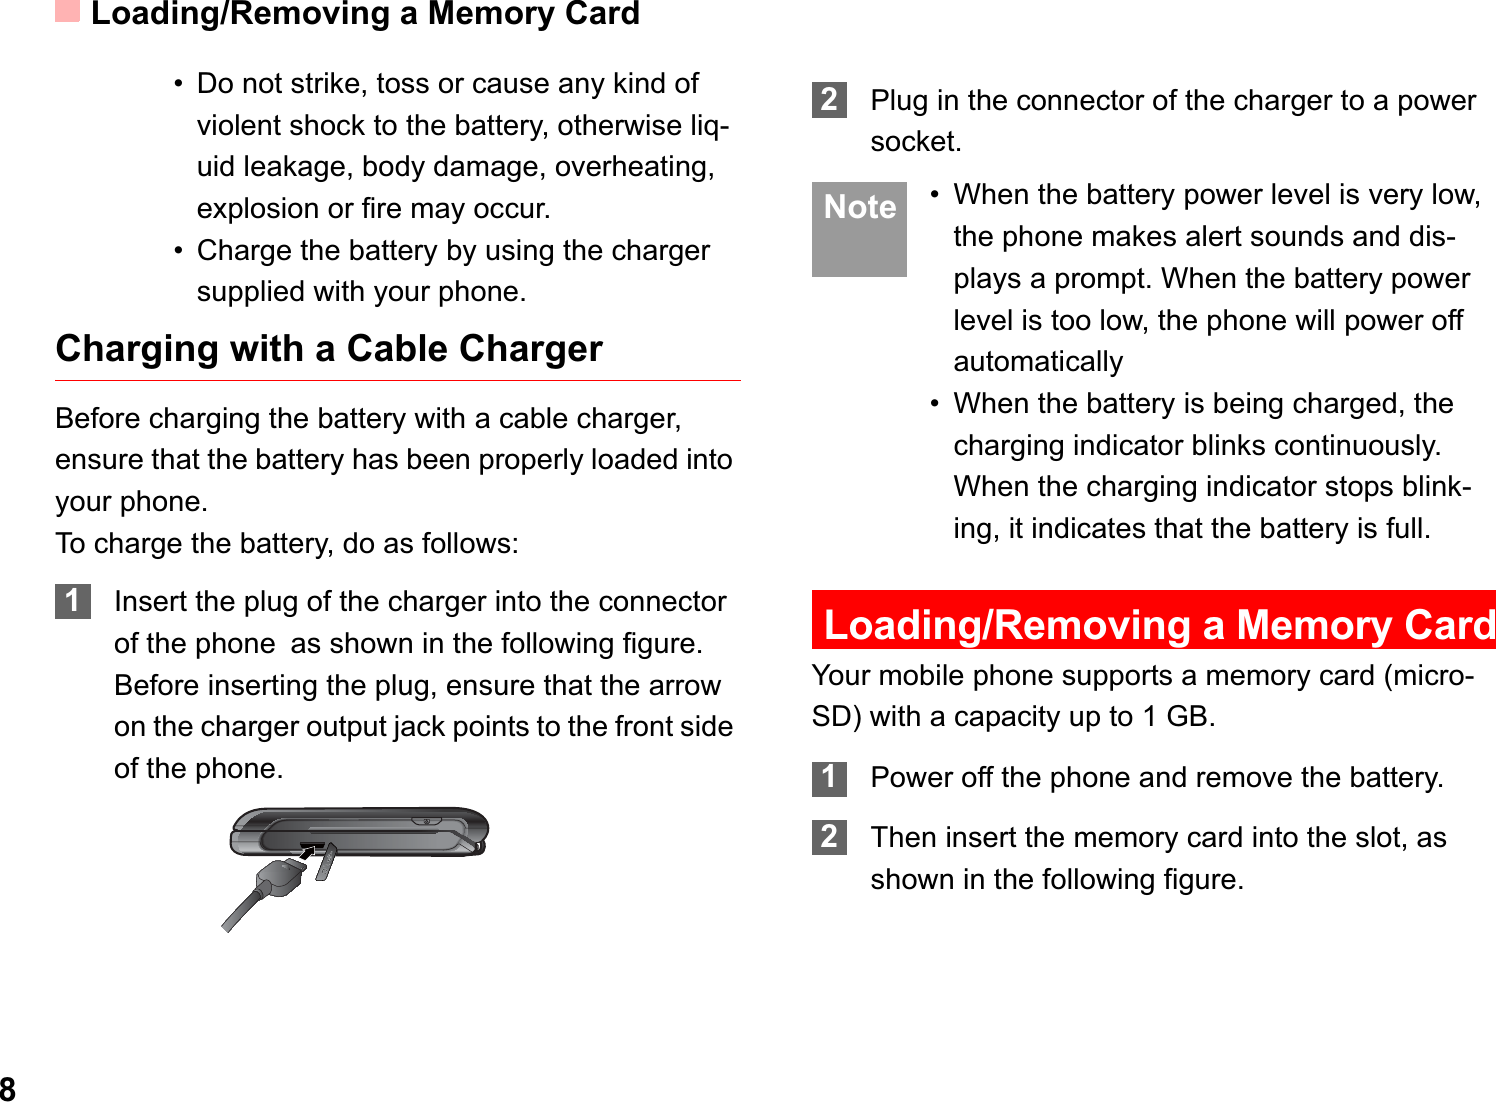 Loading/Removing a Memory Card8• Do not strike, toss or cause any kind of violent shock to the battery, otherwise liq-uid leakage, body damage, overheating, explosion or fire may occur.• Charge the battery by using the charger supplied with your phone.Charging with a Cable ChargerBefore charging the battery with a cable charger, ensure that the battery has been properly loaded into your phone.To charge the battery, do as follows:1Insert the plug of the charger into the connector of the phoneas shown in the following figure. Before inserting the plug, ensure that the arrow on the charger output jack points to the front side of the phone.2Plug in the connector of the charger to a power socket. Note • When the battery power level is very low, the phone makes alert sounds and dis-plays a prompt. When the battery power level is too low, the phone will power off automatically• When the battery is being charged, the charging indicator blinks continuously. When the charging indicator stops blink-ing, it indicates that the battery is full.Loading/Removing a Memory CardYour mobile phone supports a memory card (micro-SD) with a capacity up to 1 GB.1Power off the phone and remove the battery.2Then insert the memory card into the slot, as shown in the following figure.